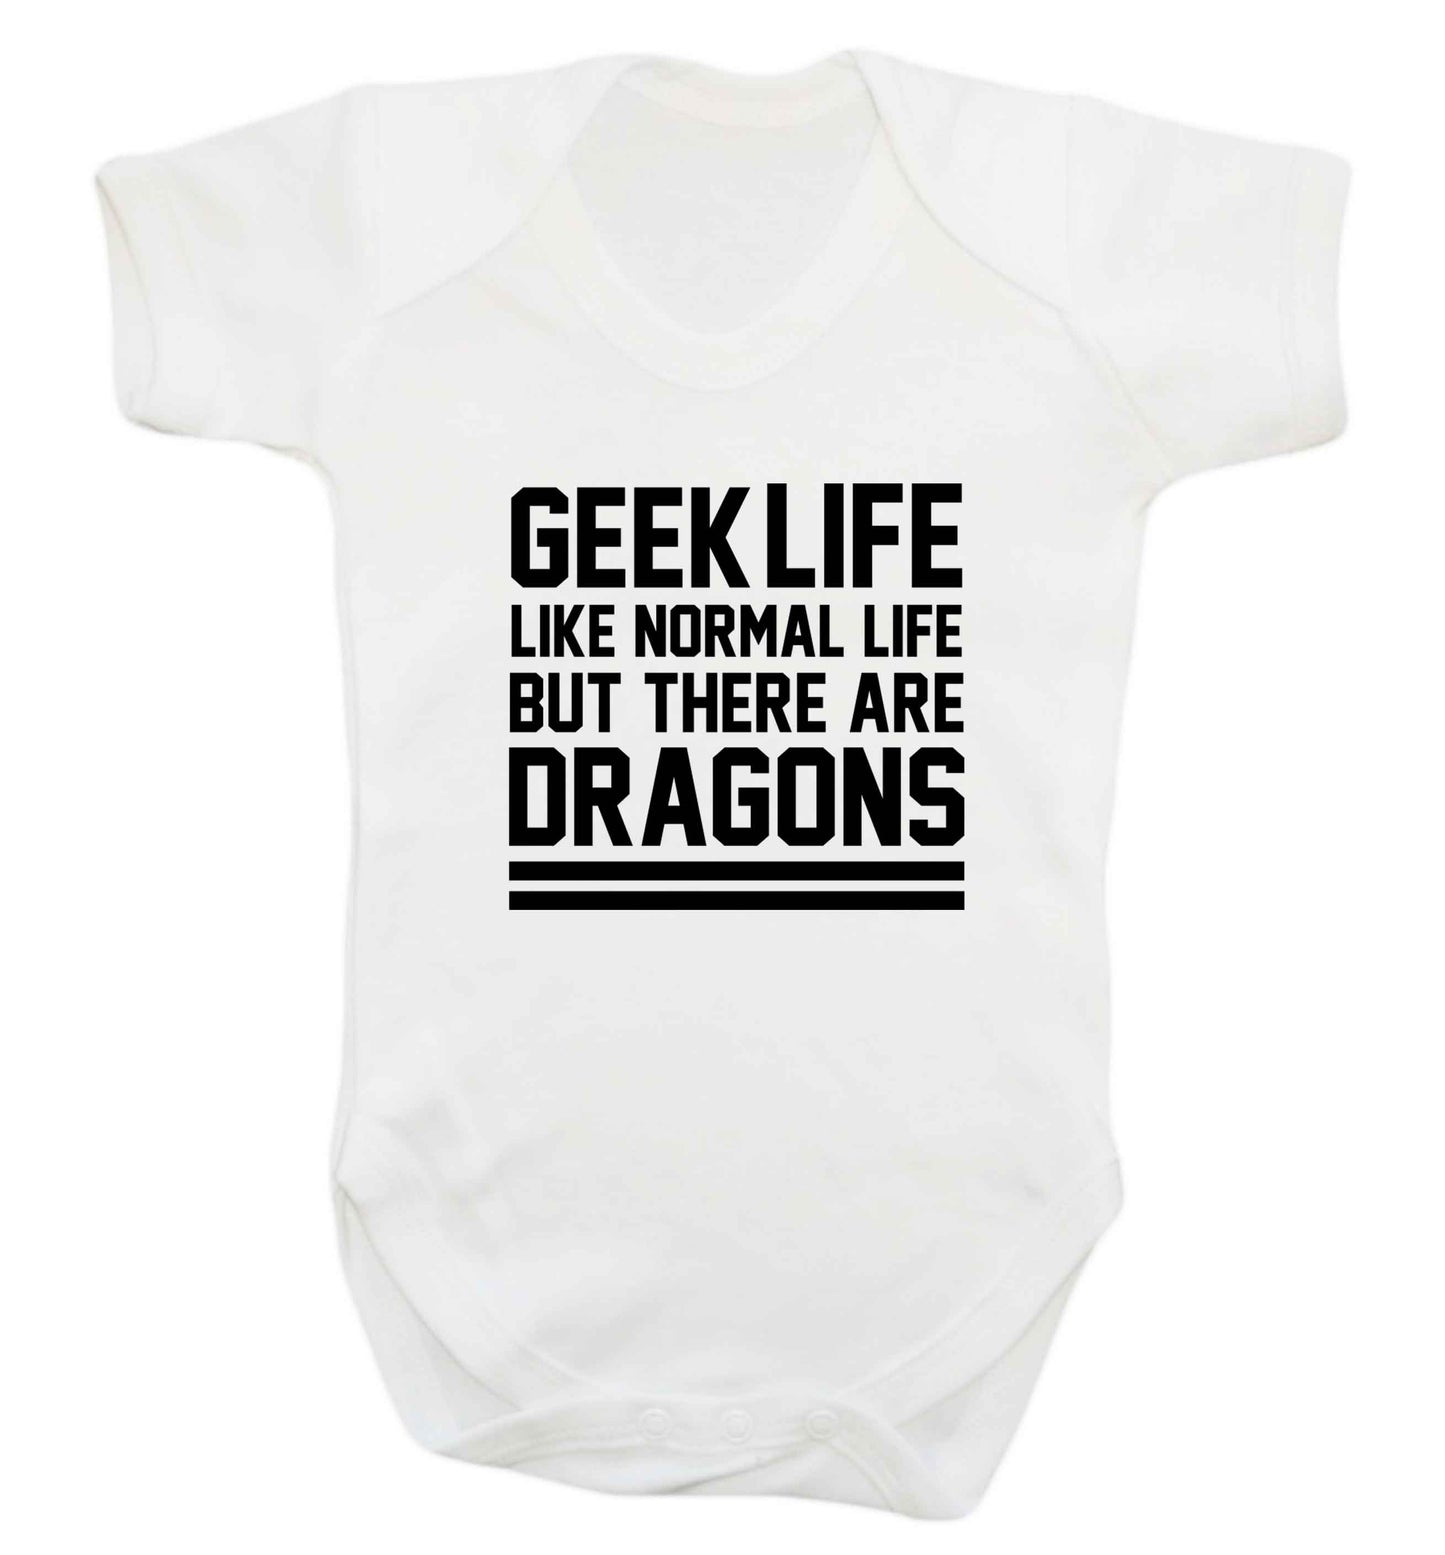 Geek life like normal life but there are dragons baby vest white 18-24 months